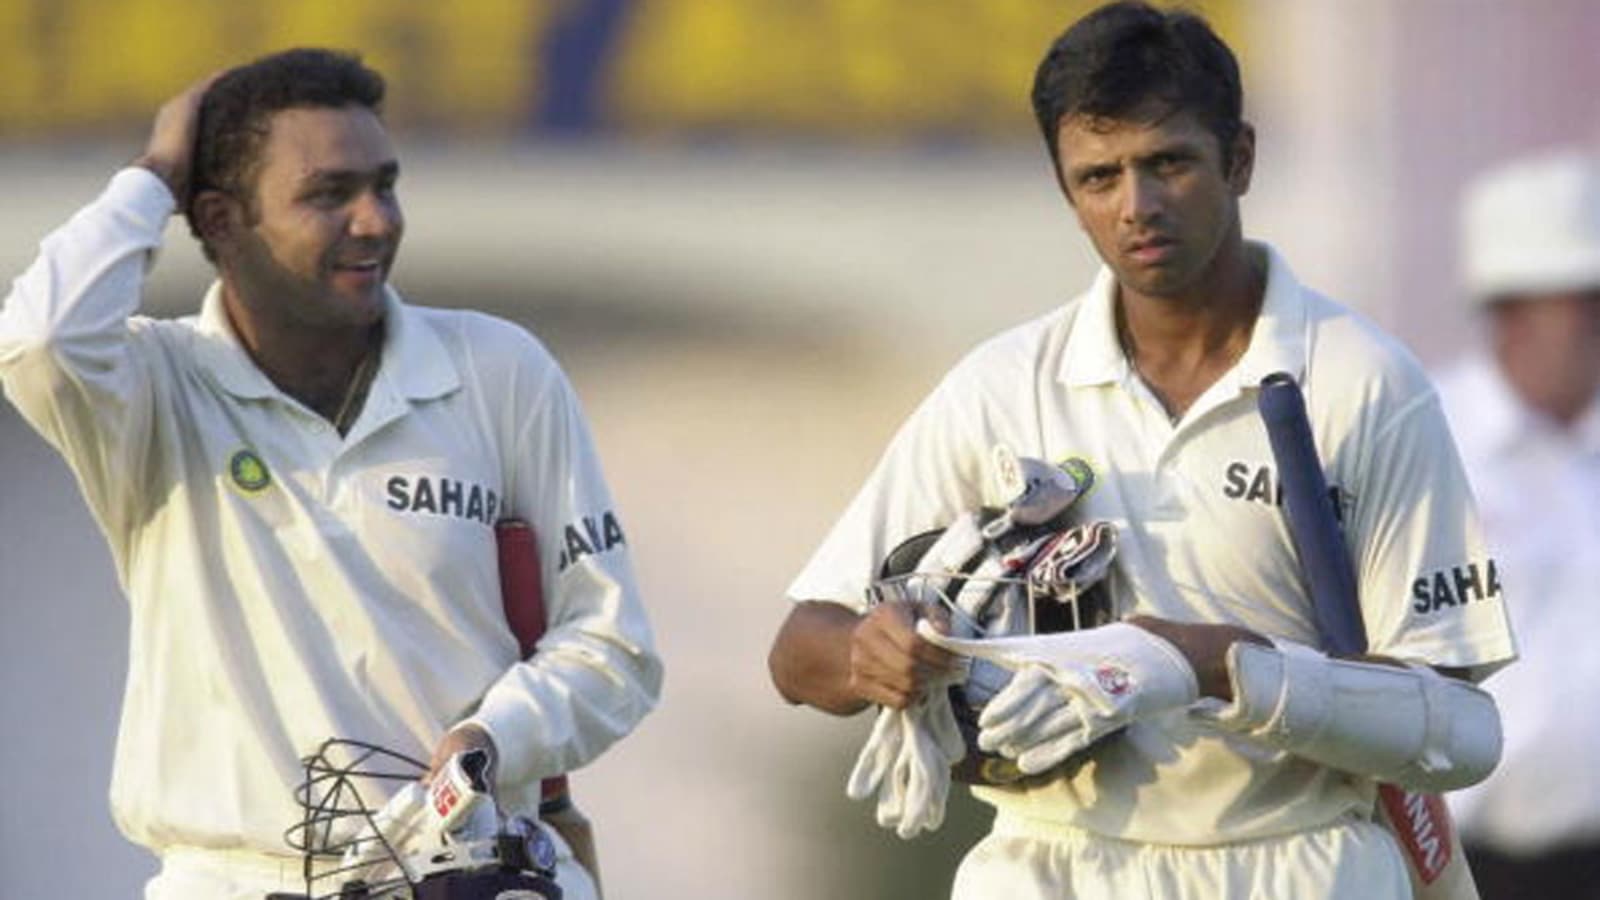 Rahul Dravid Photos & HD Wallpapers for Free Download: Happy Birthday Dravid  Greetings, HD Images in India Cricket Team Jersey and Positive Messages To  Share Online | 🏏 LatestLY